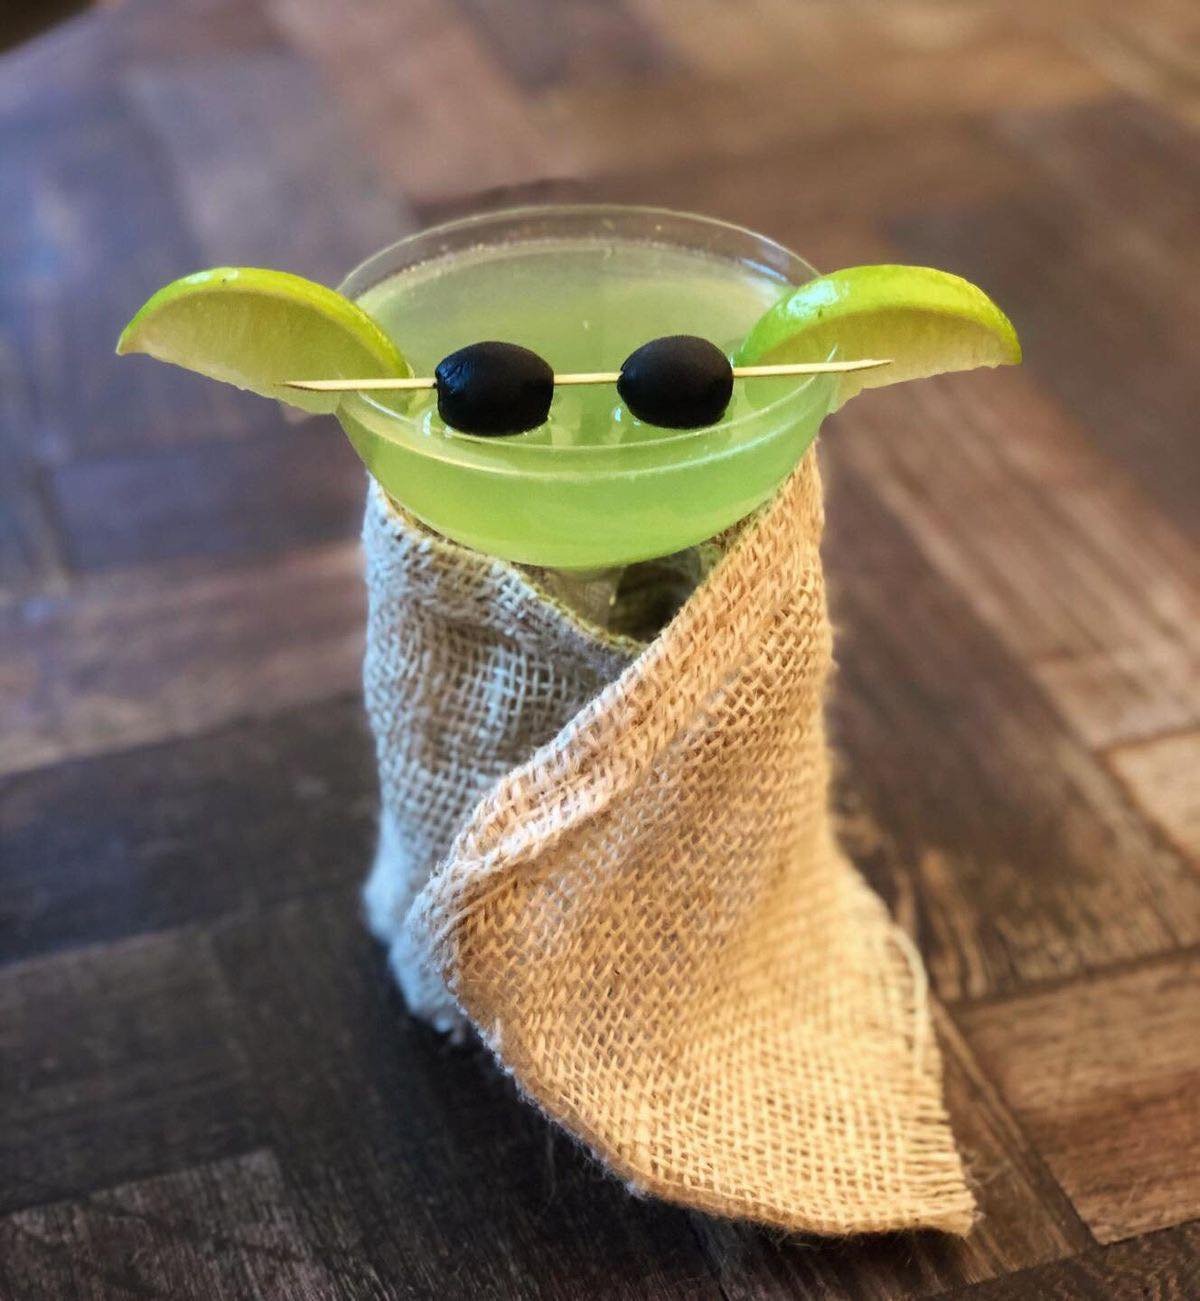 May the 4th be with you! 

Baby Yoda Cocktail

Place the peeled kiwi in the bottom of a cocktail shaker and muddle till you get a puree type consistency. Add the vodka, syrup and lime juice and fill with ice. Shake till cold and strain into a coupe

